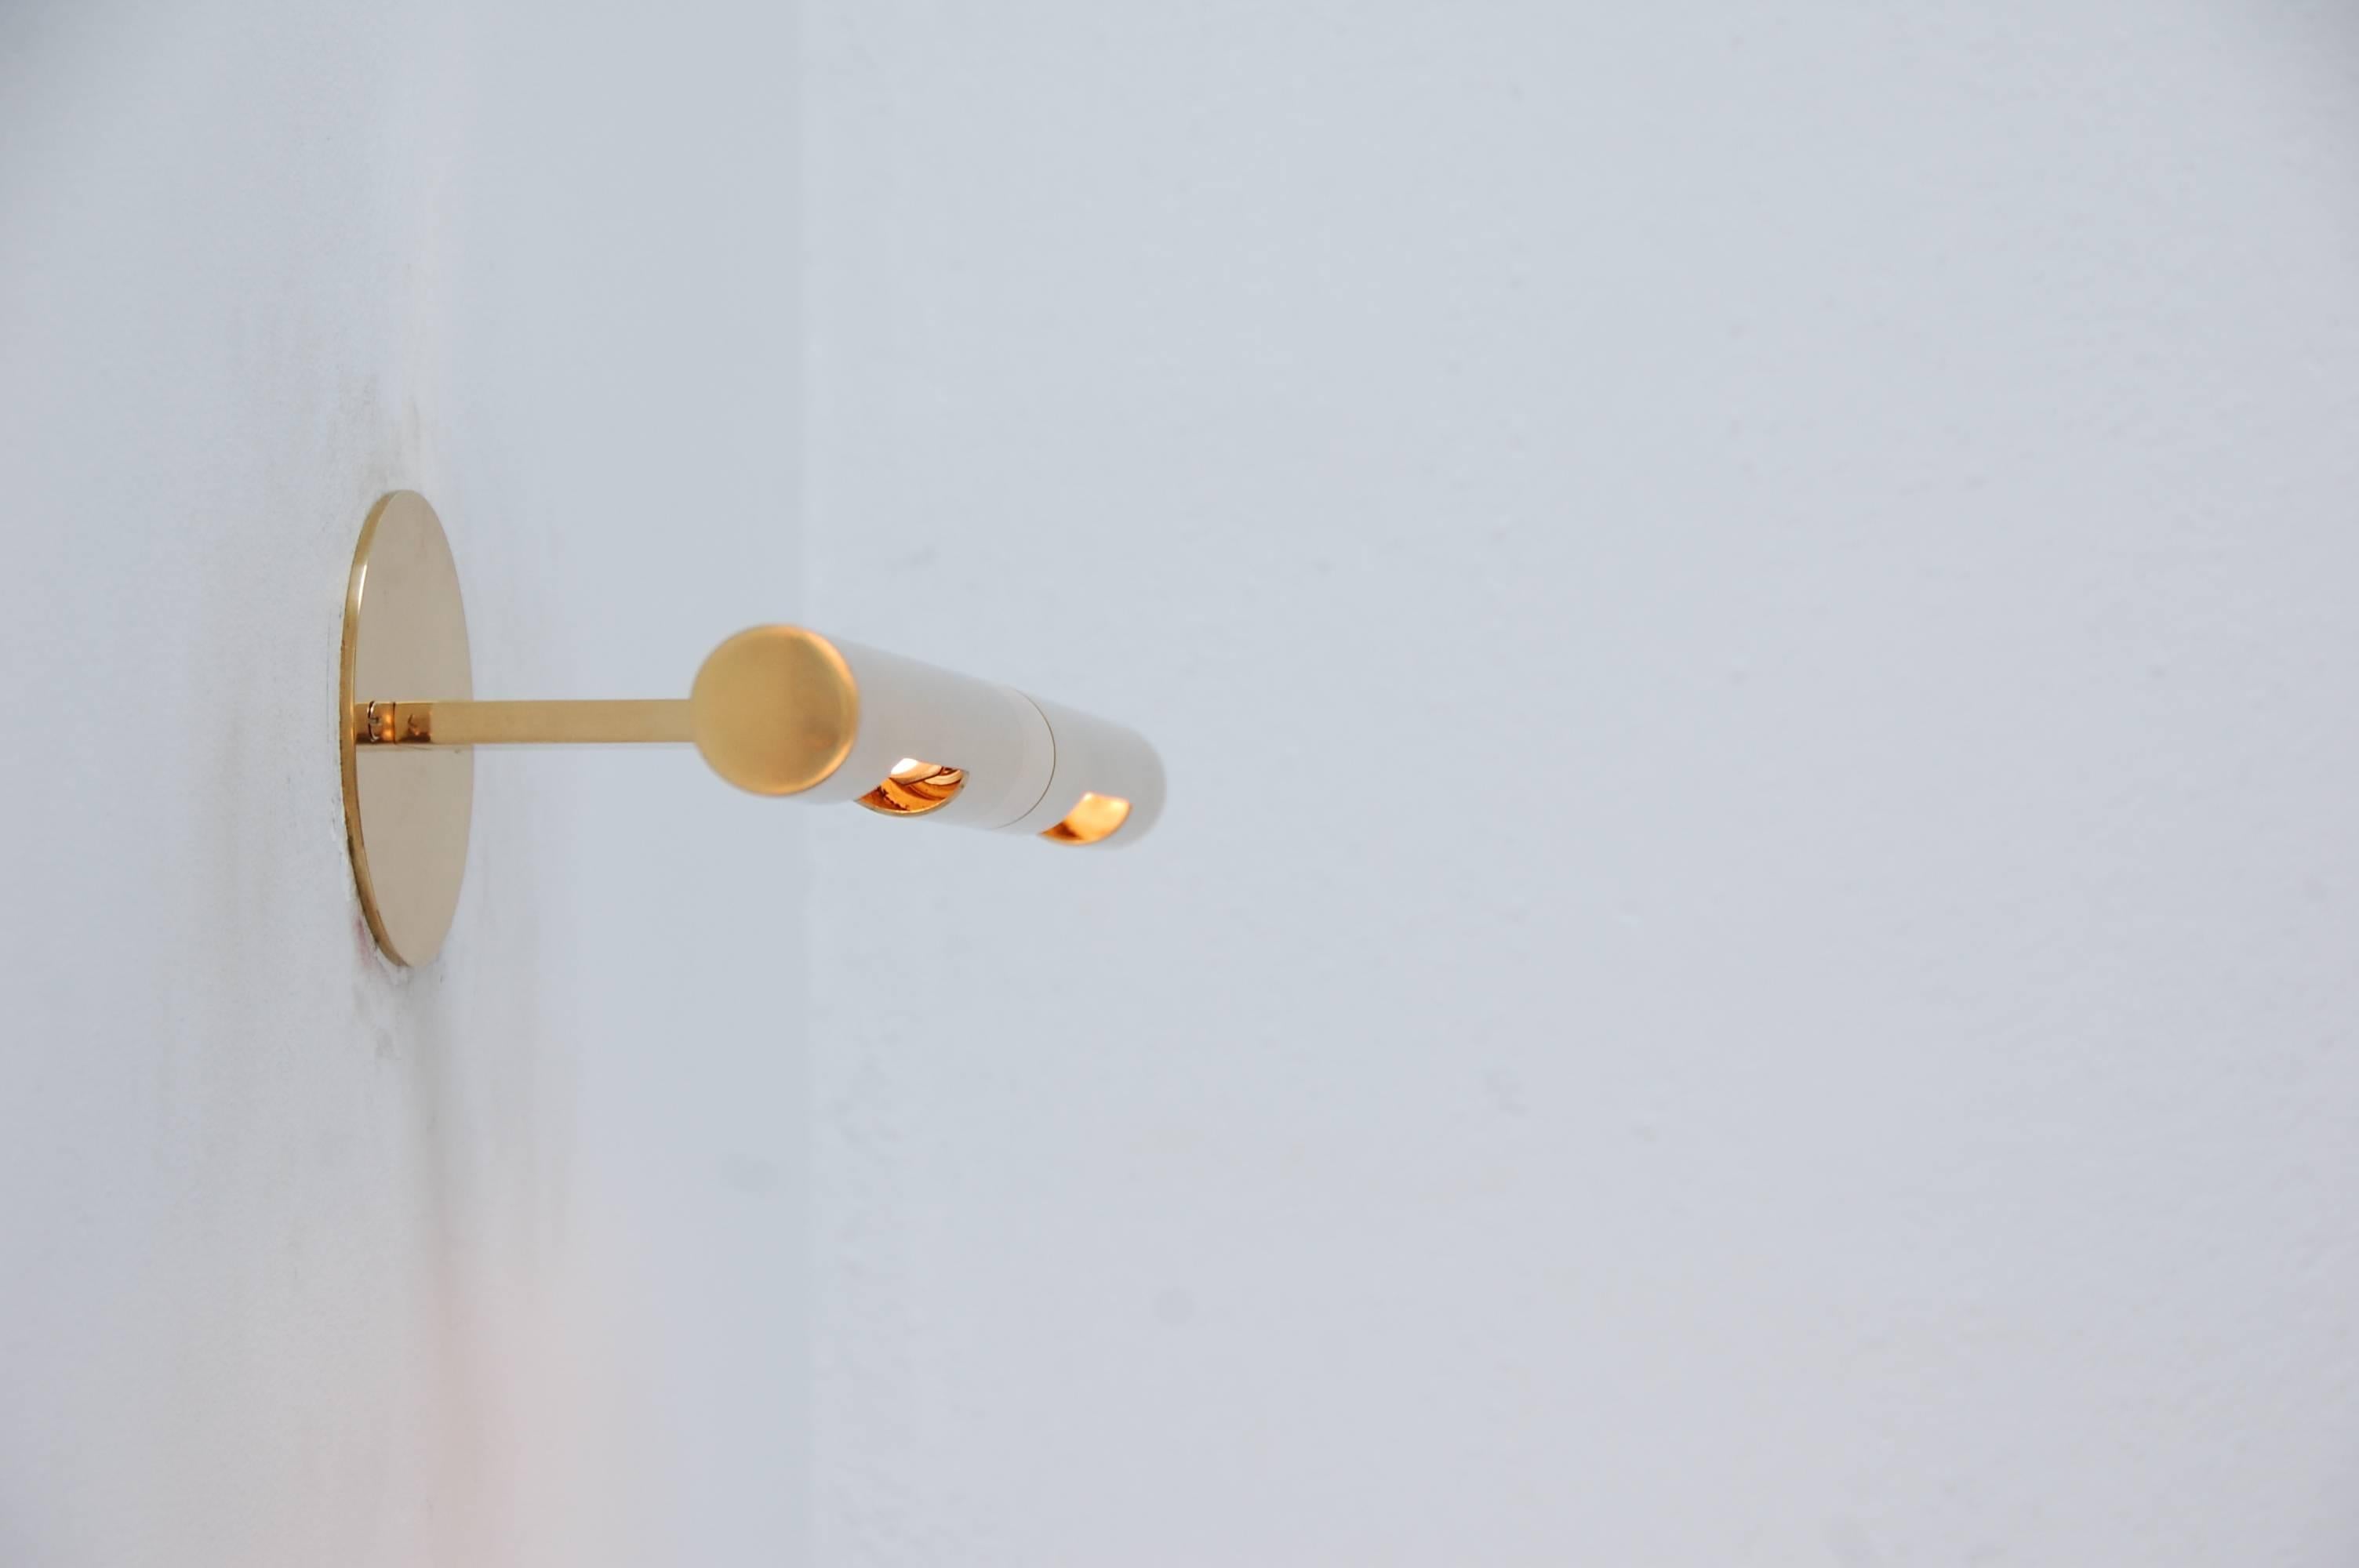 LUart Directional Sconce G by Lumfardo Luminaires In Excellent Condition For Sale In Los Angeles, CA